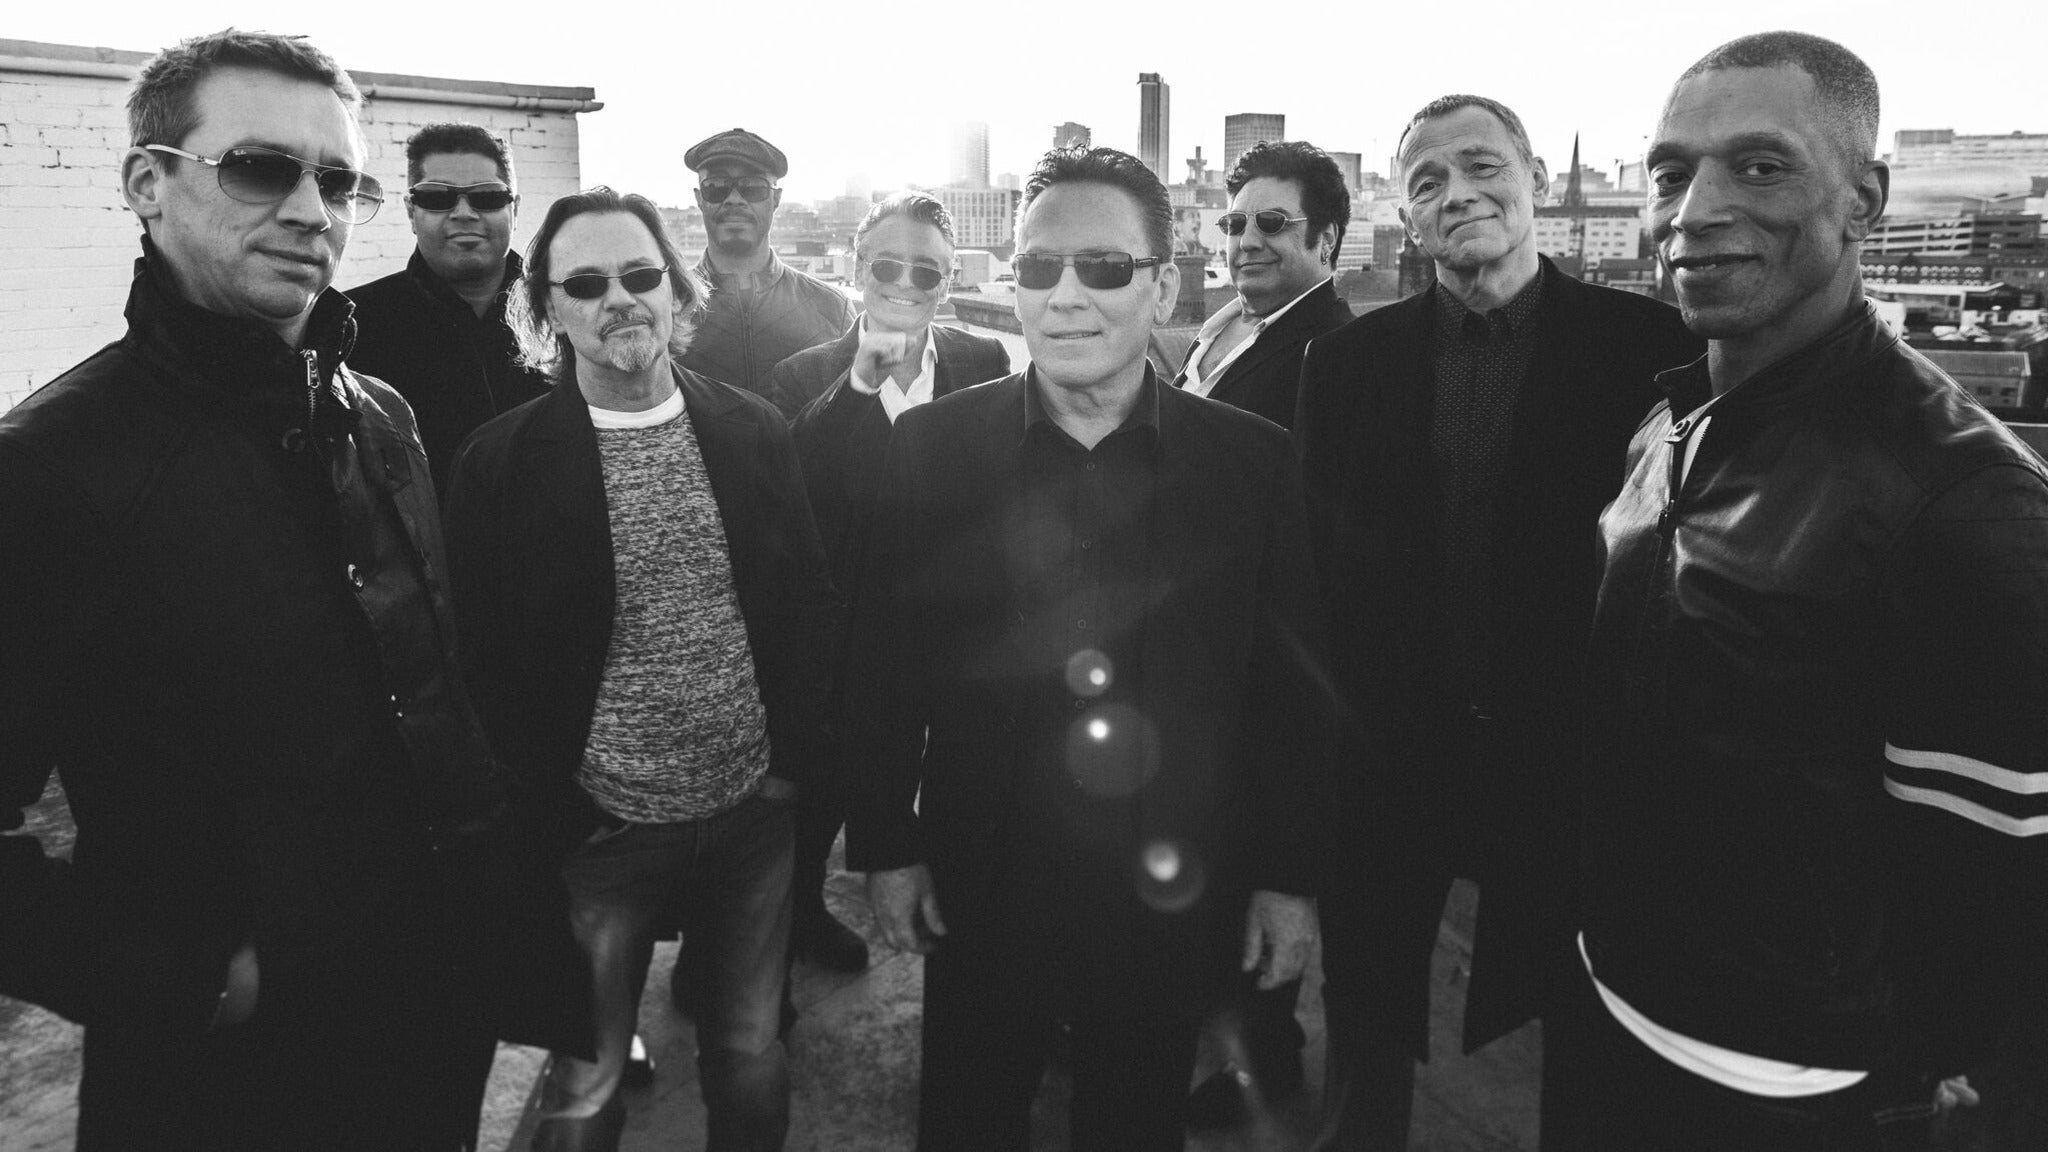 Image used with permission from Ticketmaster | UB40 40TH ANNIVERSARY FOR THE MANY TOUR - CONCERT tickets